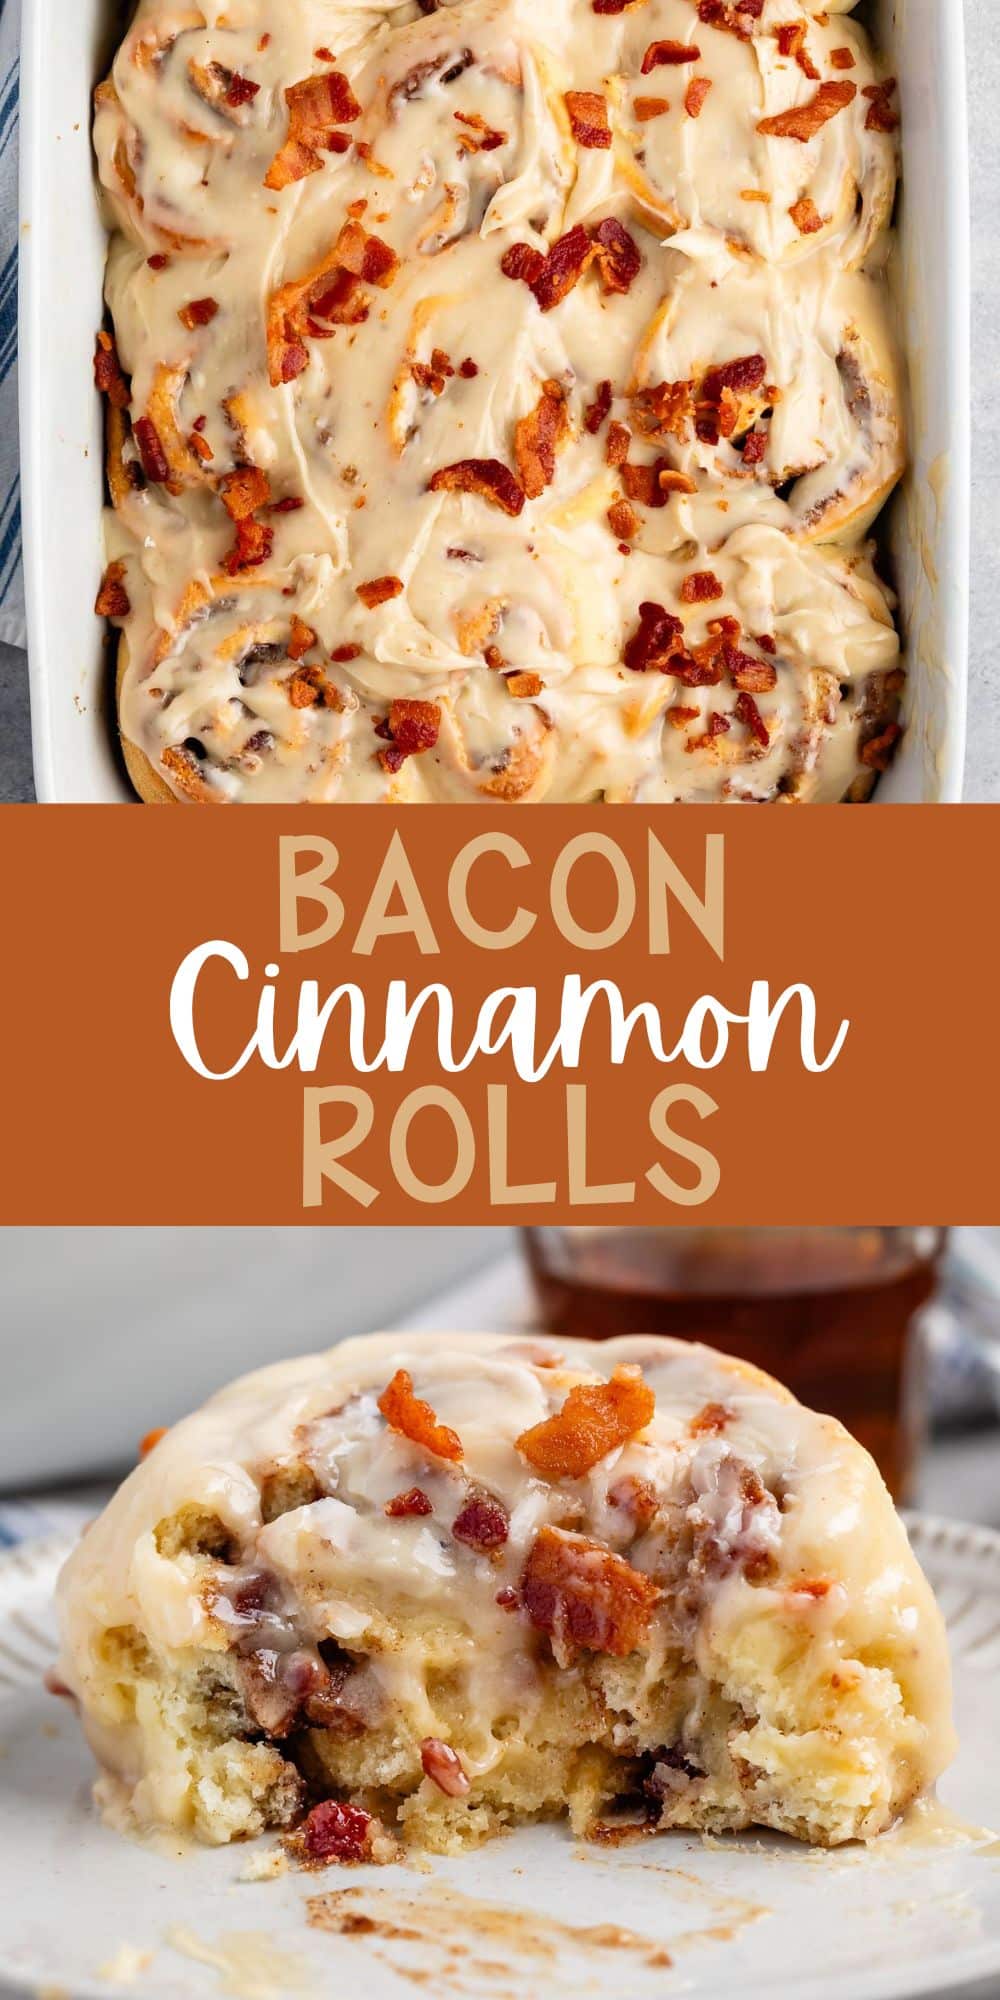 two photos of maple bacon cinnamon roll iced with white icing and sprinkled with bacon in a white dish with words on the image.